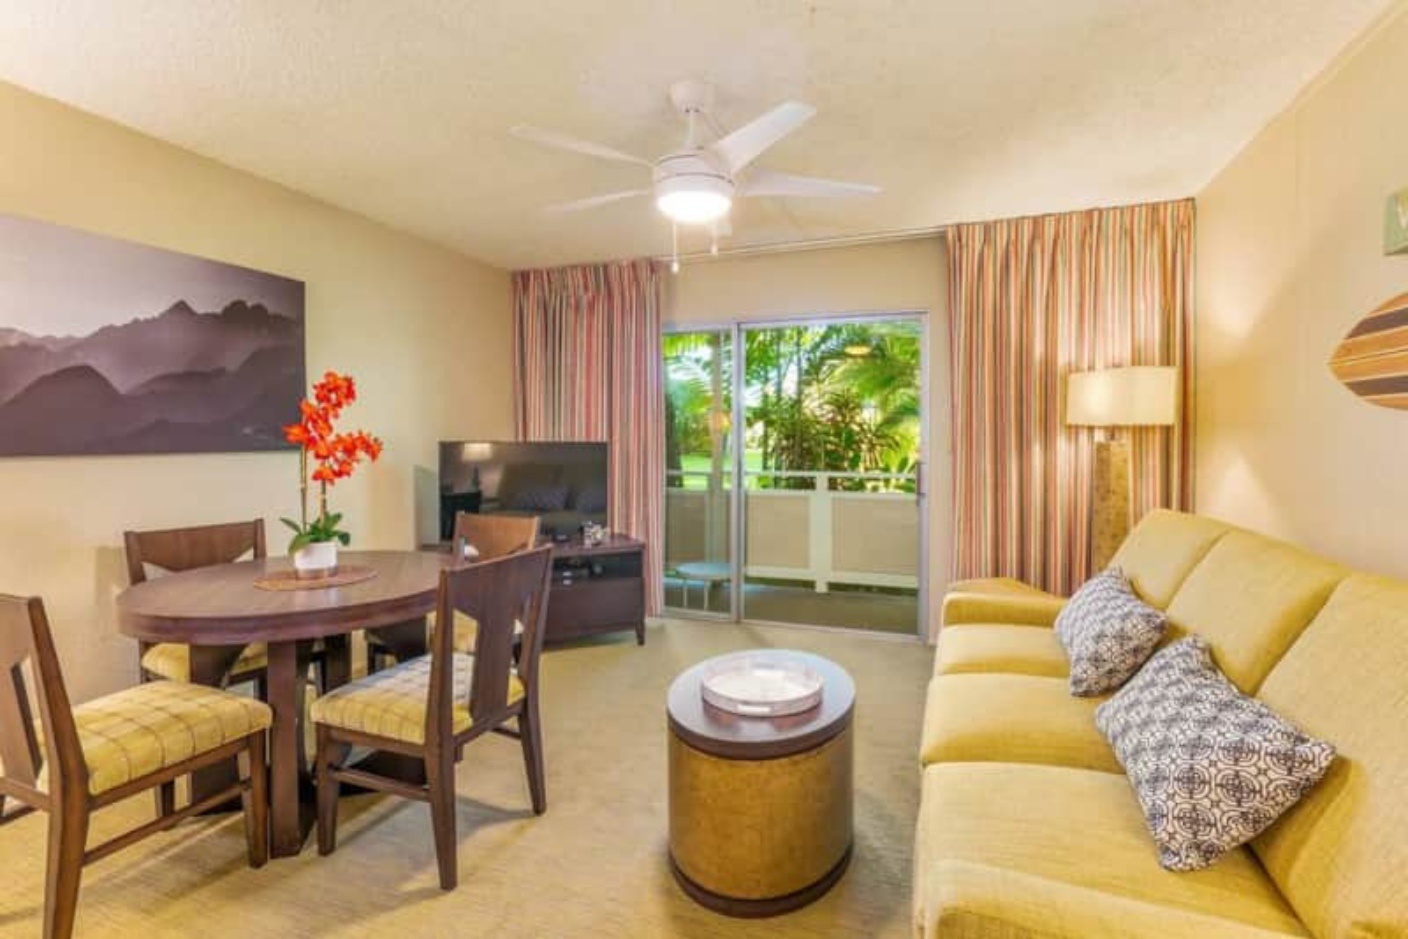 Kapaa Vacation Rentals, Kahaki Hale - The living space feature comfortable sofa and a dining area